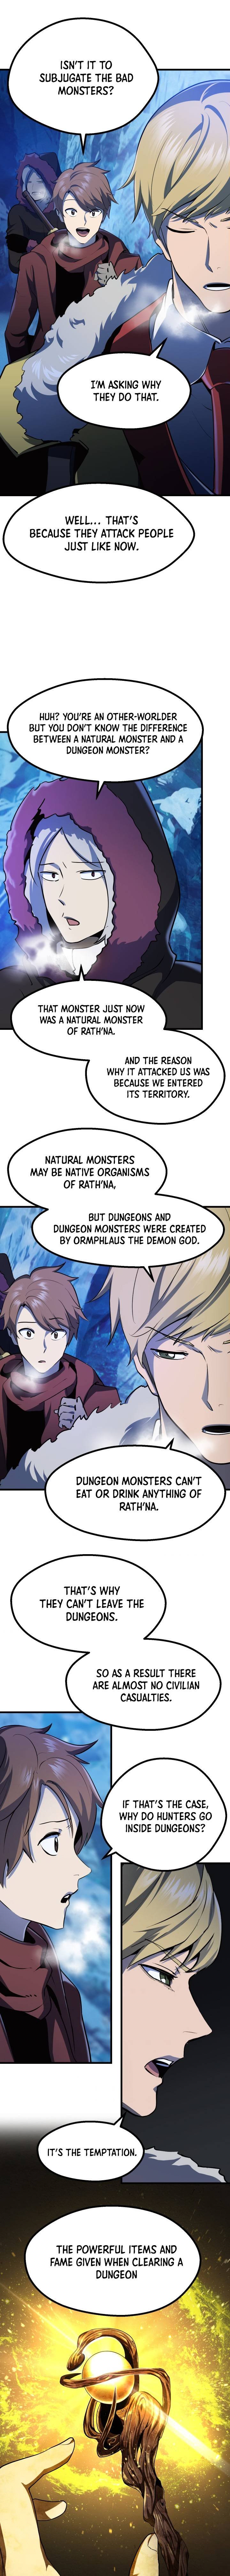 survival-story-of-a-sword-king-in-a-fantasy-world-chap-85-16